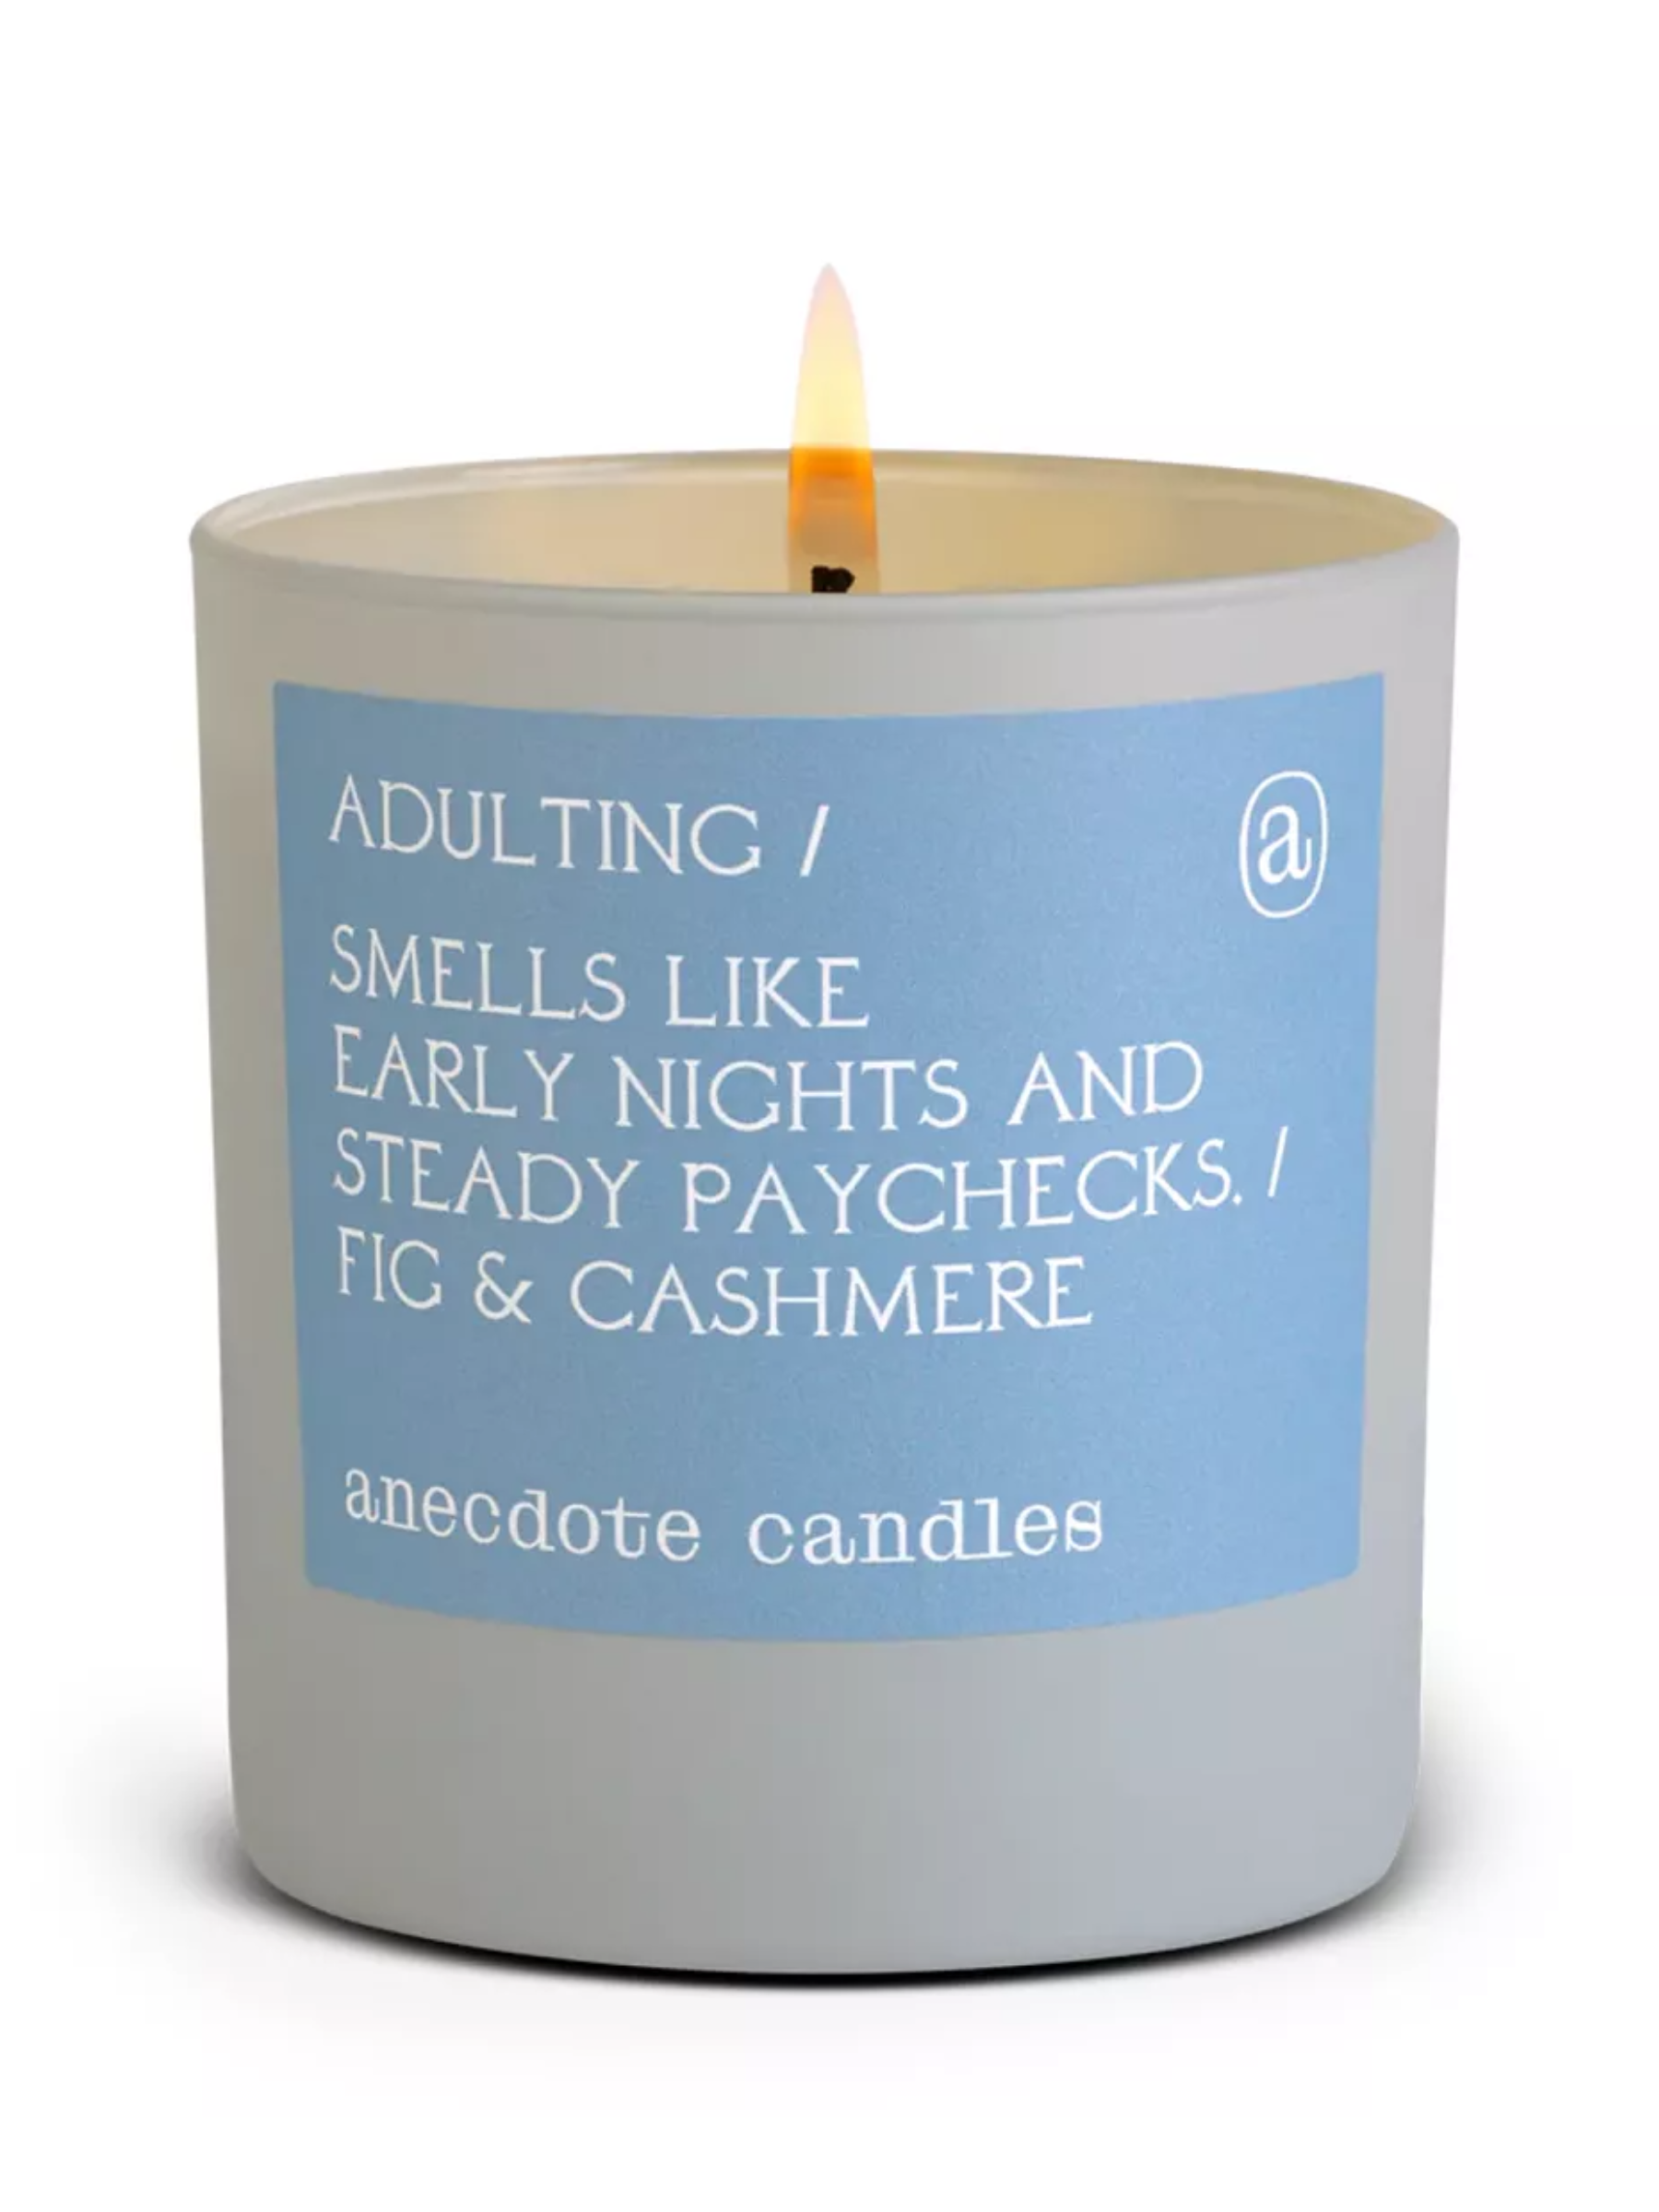 <p>Nothing helps spruce up a room more than a luxe candle. The label jokes that it smells like early nights and steady paychecks, but its top notes are actually fig and cashmere.</p> <p><em>Save when you shop for the best graduation gift ideas with these <a href="https://www.glamour.com/coupons/amazon?mbid=synd_msn_rss&utm_source=msn&utm_medium=syndication">Amazon promo code promo codes</a>.</em></p> $34, Amazon. <a href="https://www.amazon.com/Anecdote-Candles-Adulting-Cashmere-Decorative/dp/B0BSG36NFS">Get it now!</a><p>Sign up for today’s biggest stories, from pop culture to politics.</p><a href="https://www.glamour.com/newsletter/news?sourceCode=msnsend">Sign Up</a>